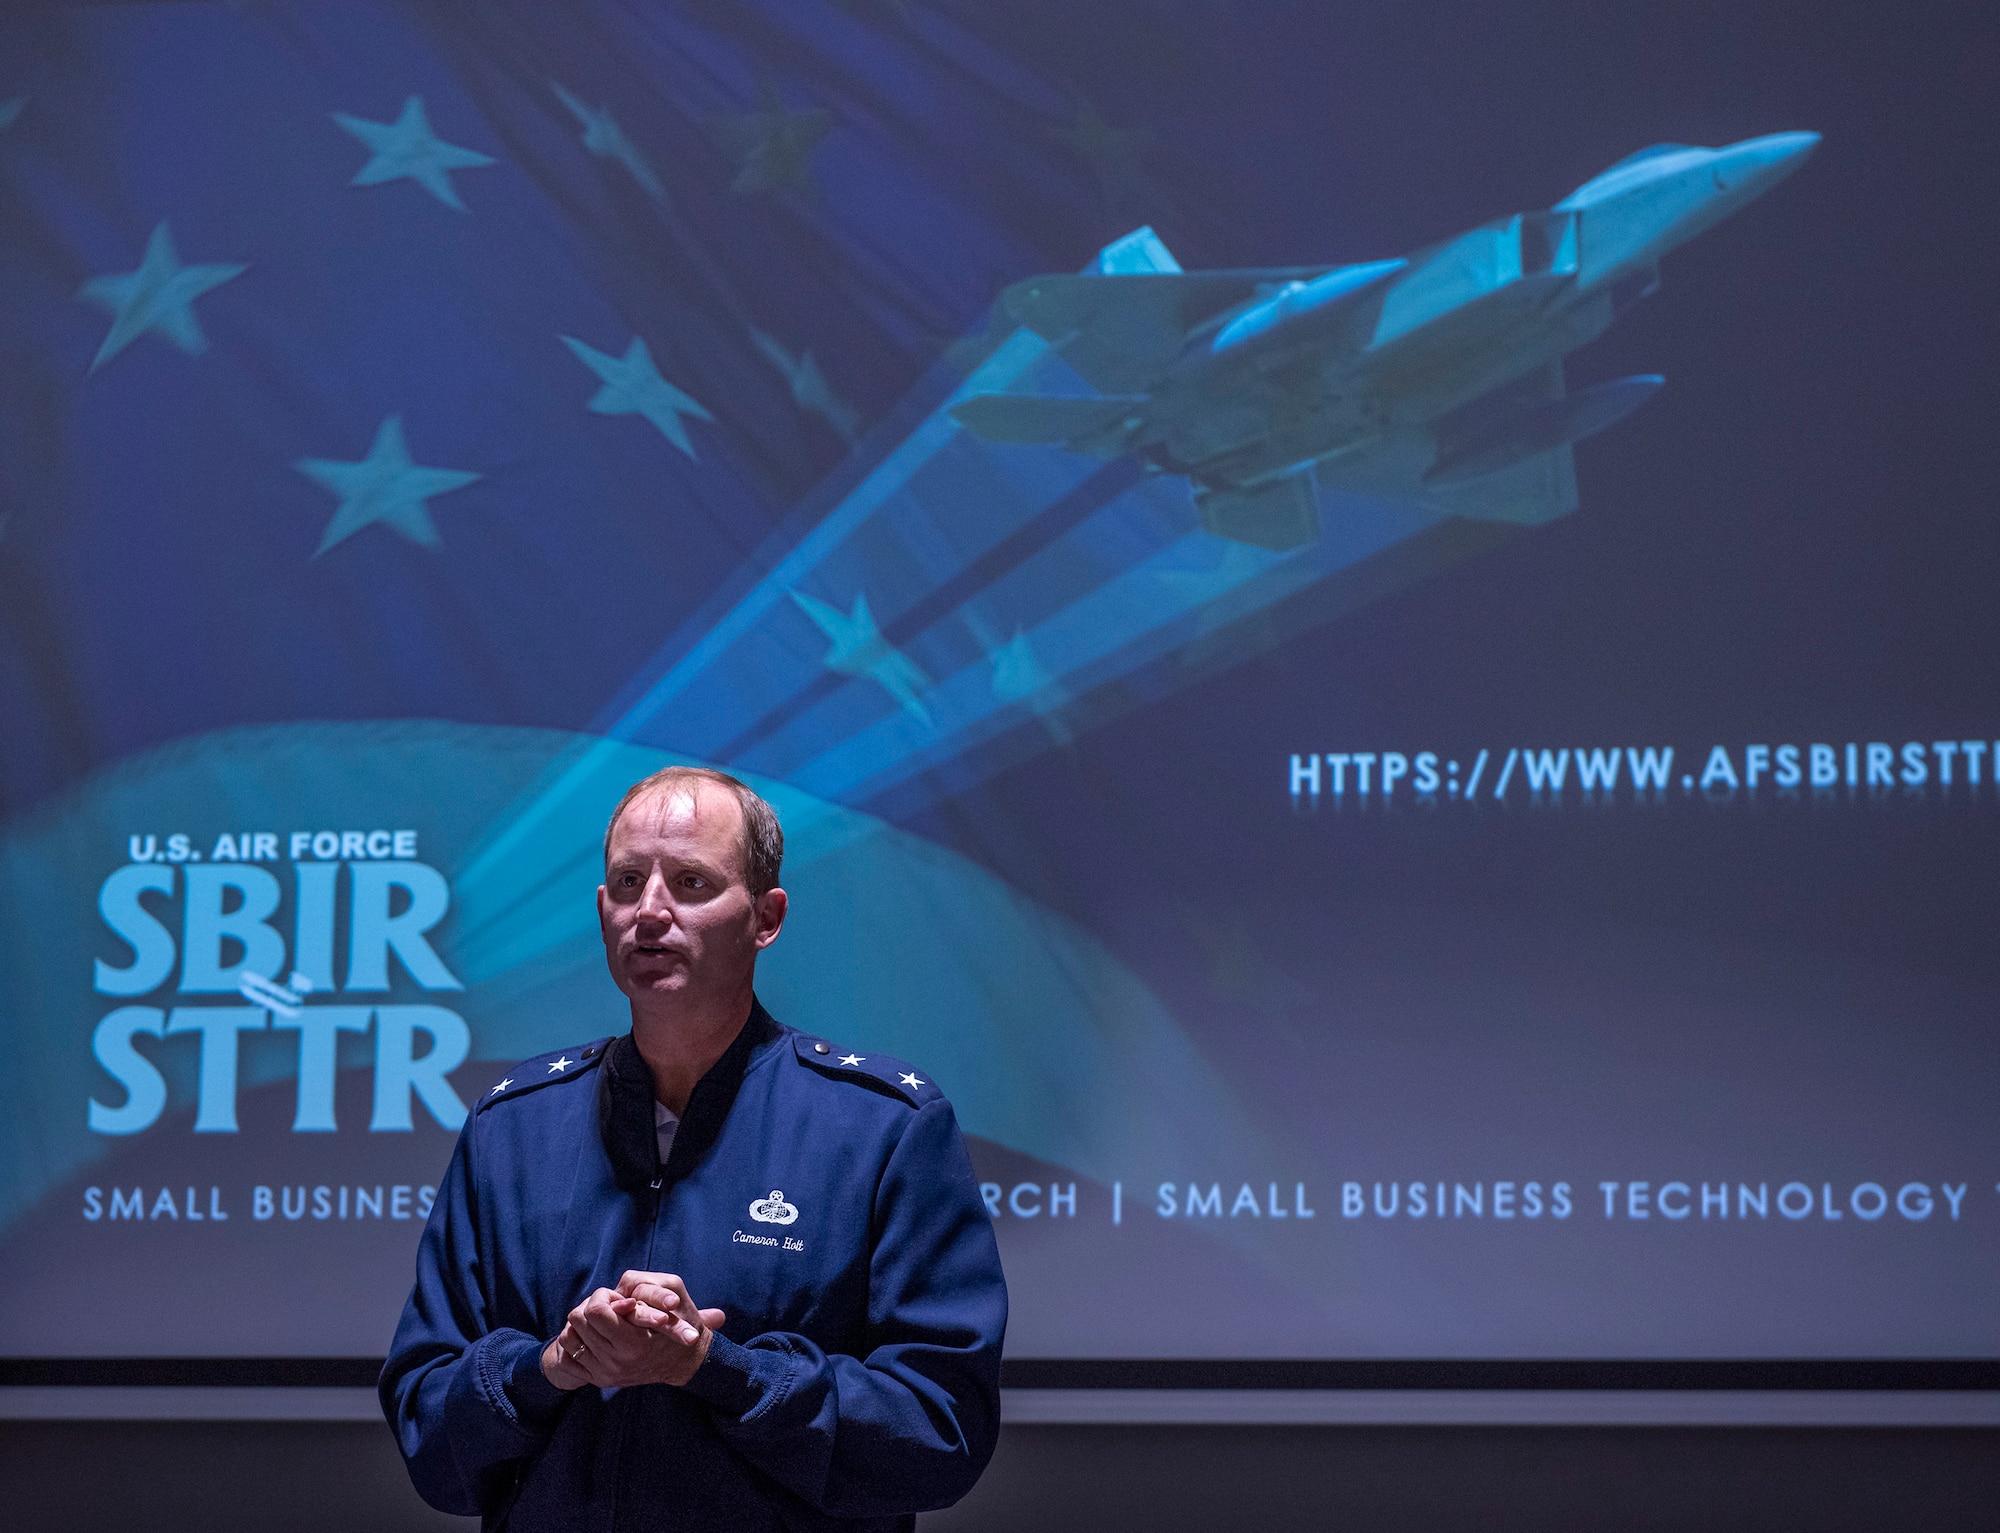 The Air Force holds the first-ever Hypersonics Pitch Day on November 7, 2019 at the Doolittle Institute in Niceville, Florida.The purpose of Air Force “pitch days” is to do business at the speed of ideas by inspiring and accelerating startup and small business creativity toward answering national security challenges.